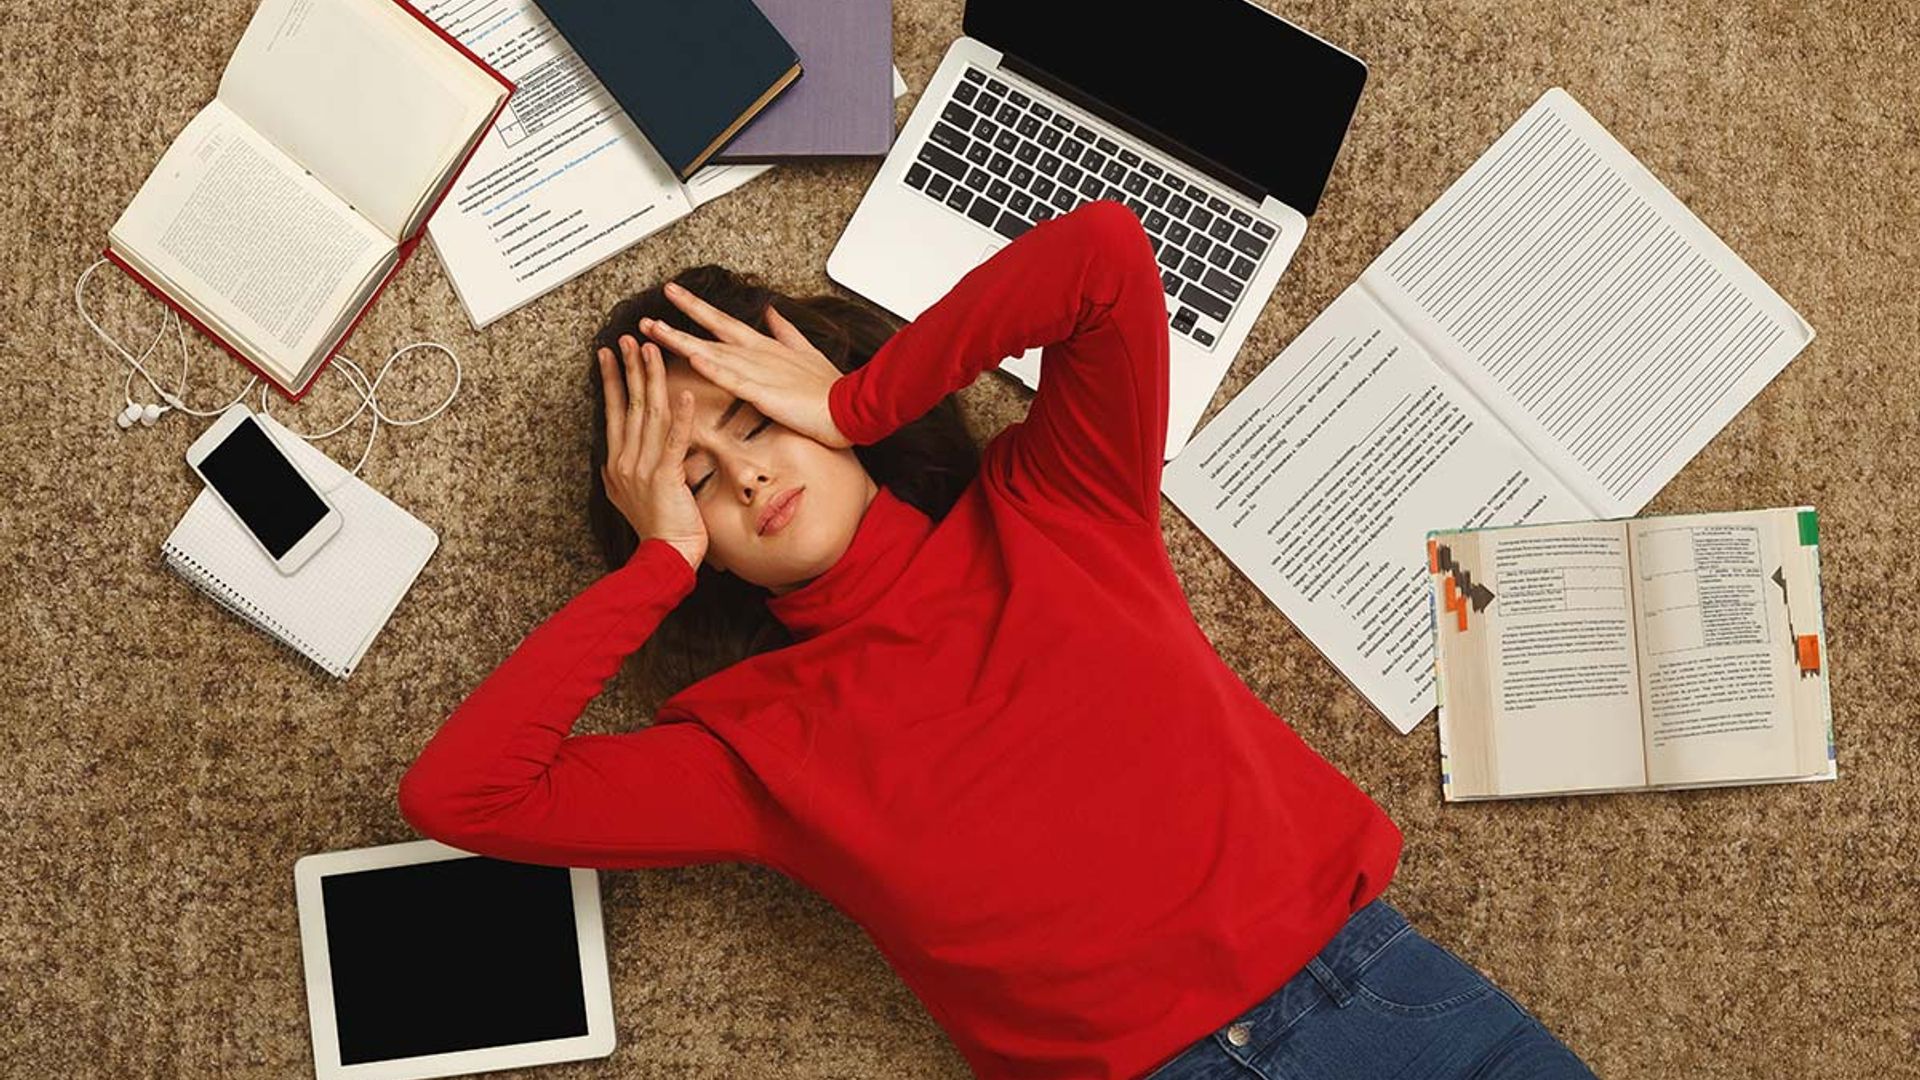 7 helpful tips for combatting exam stress in teens from a psychologist